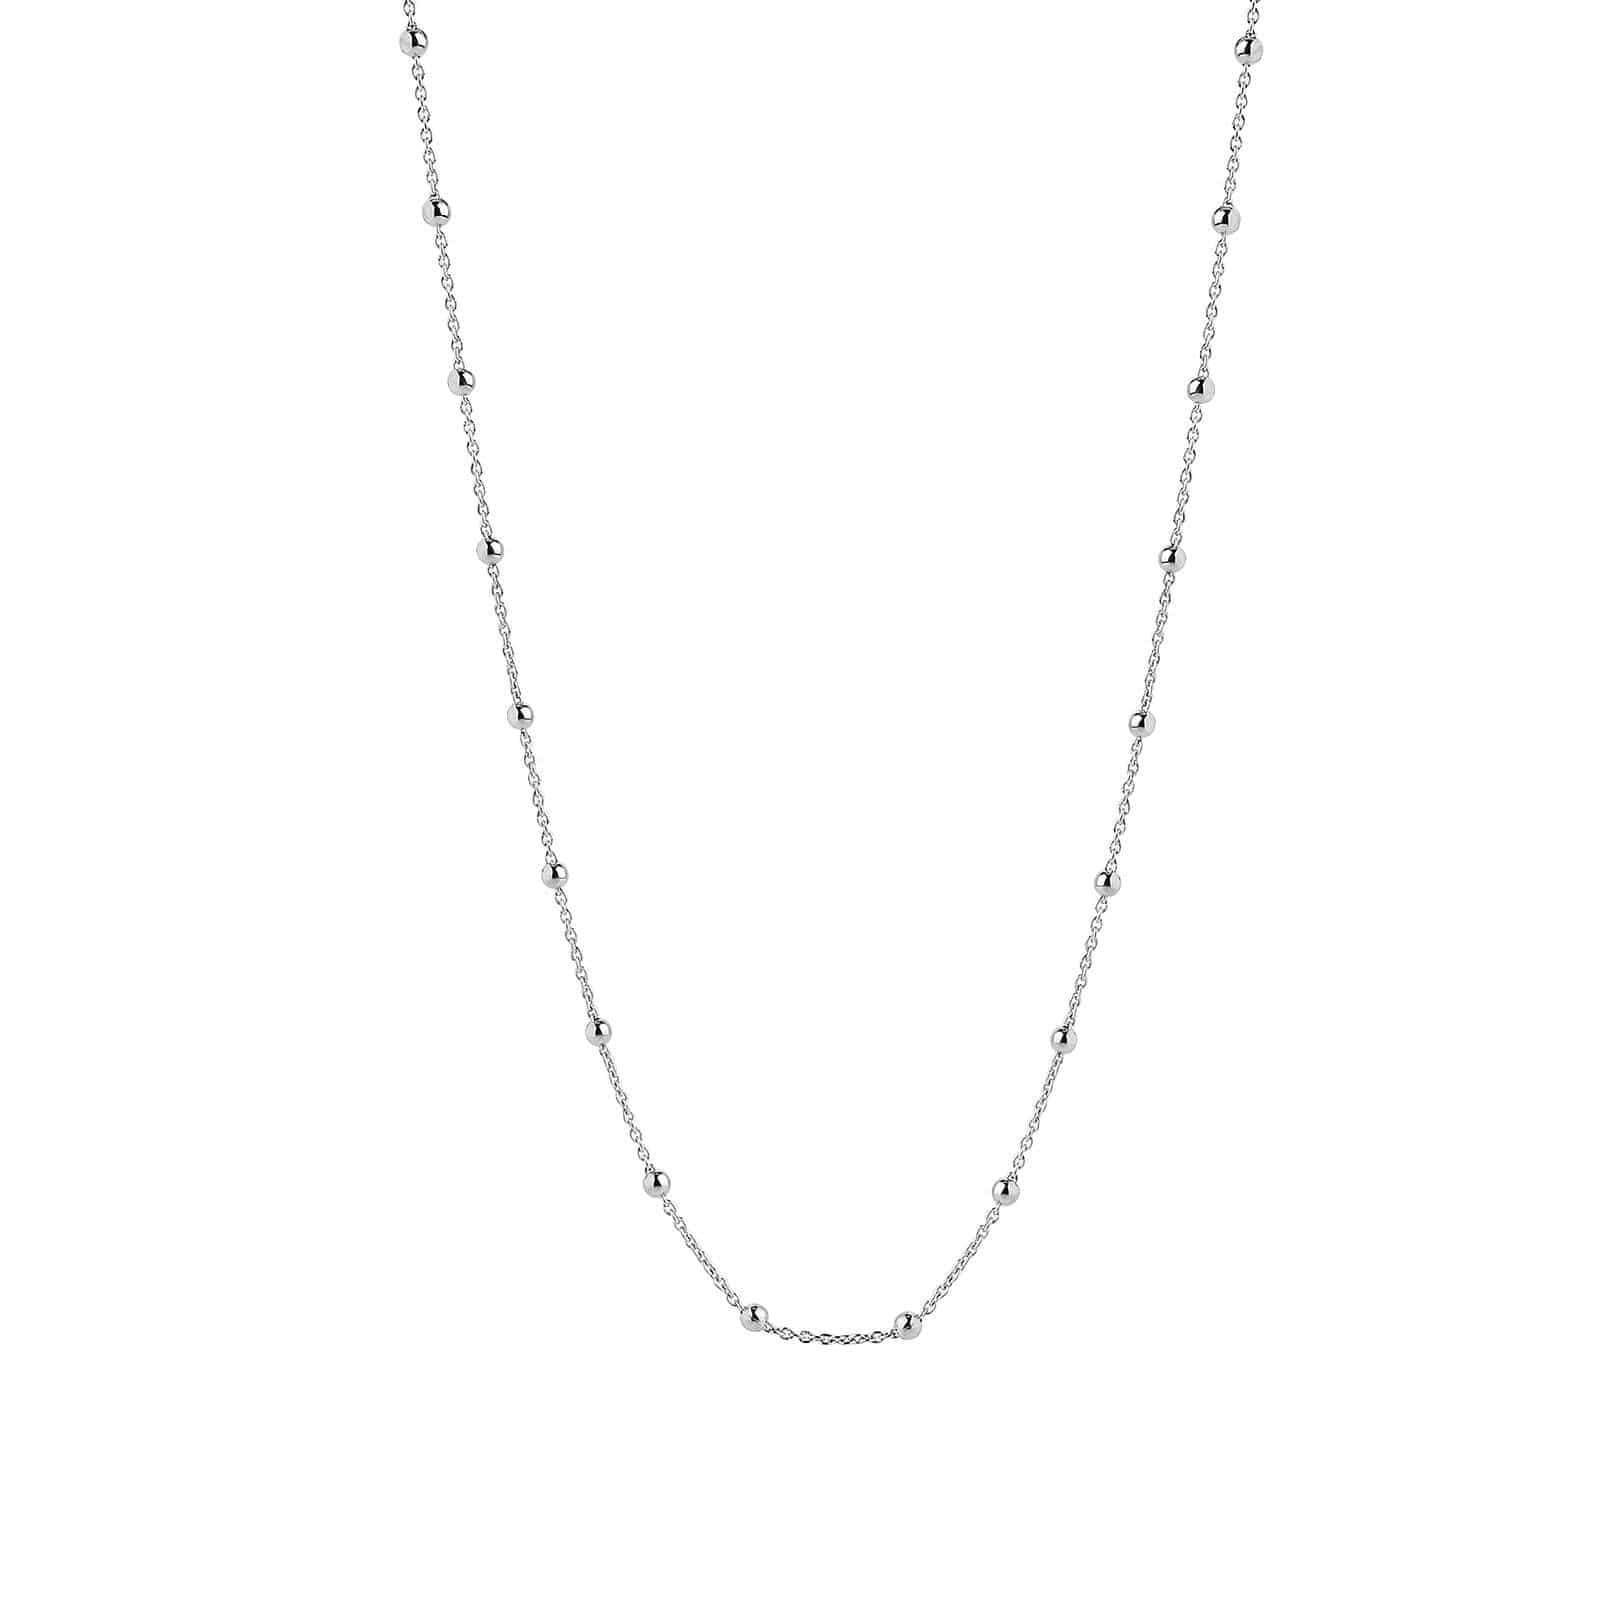 long silver necklace with balls 72cm